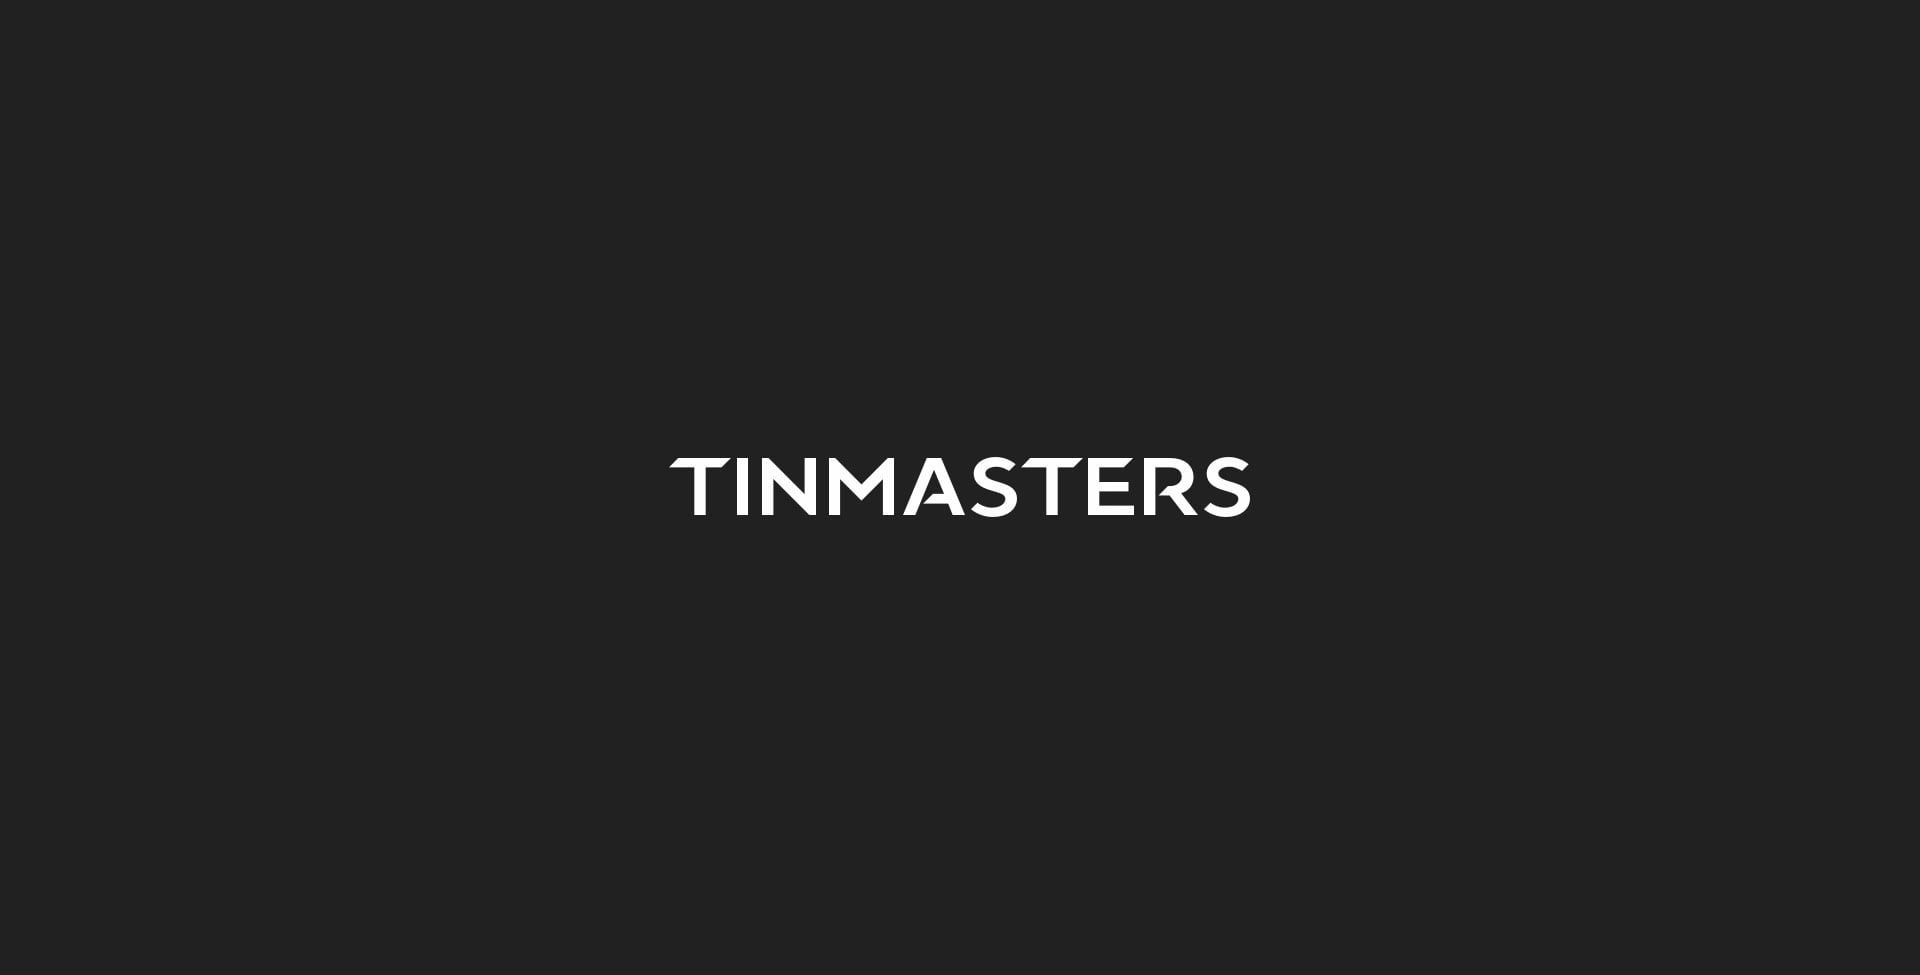 The new Tinmasters logo, part of the branding process